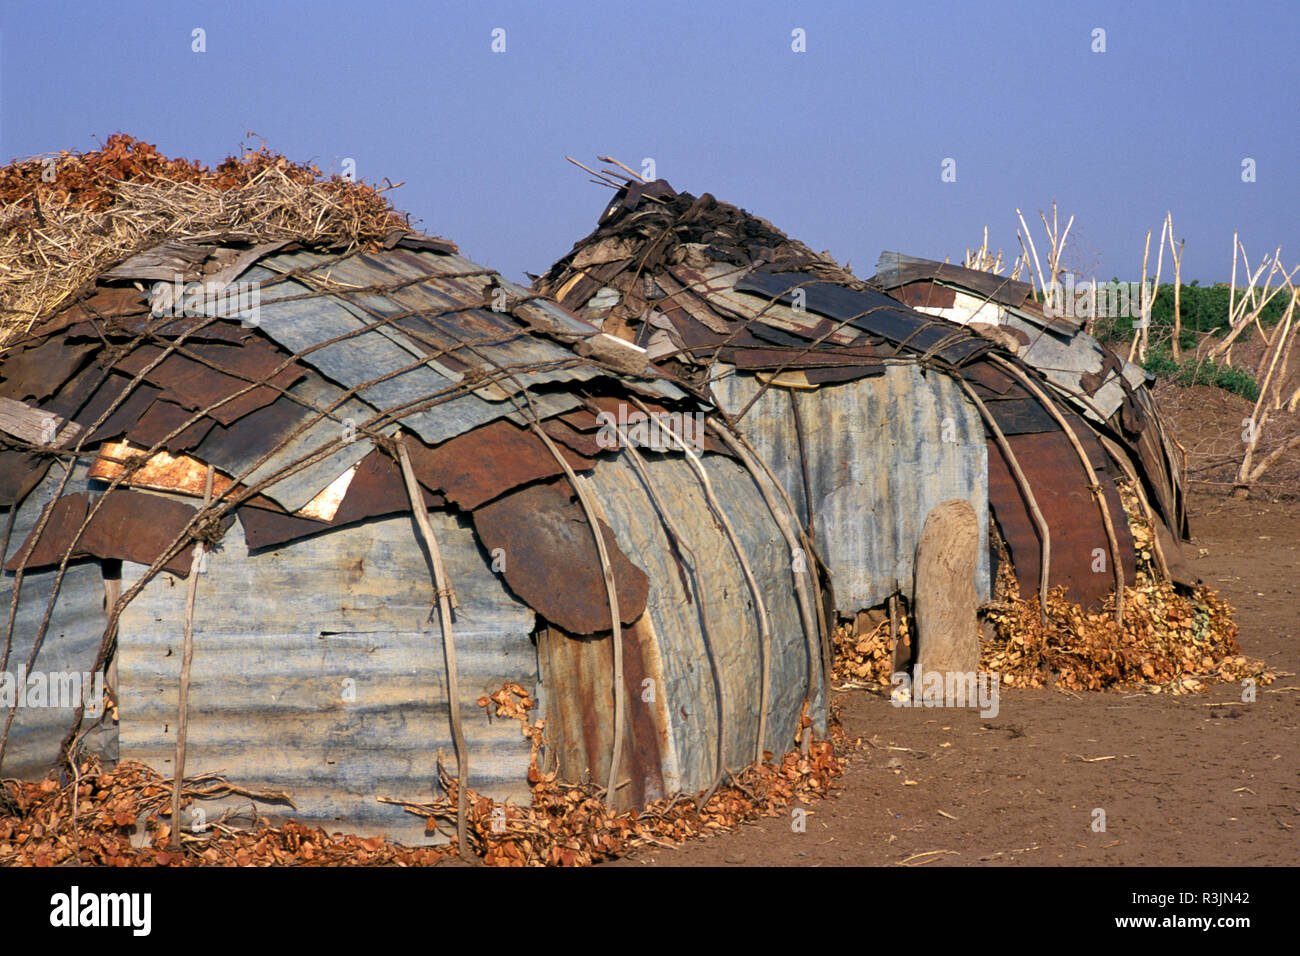 Africa, Ethiopia, Omo region. Galeb tribe houses made of grass, cloth and sheets of tin. Stock Photo